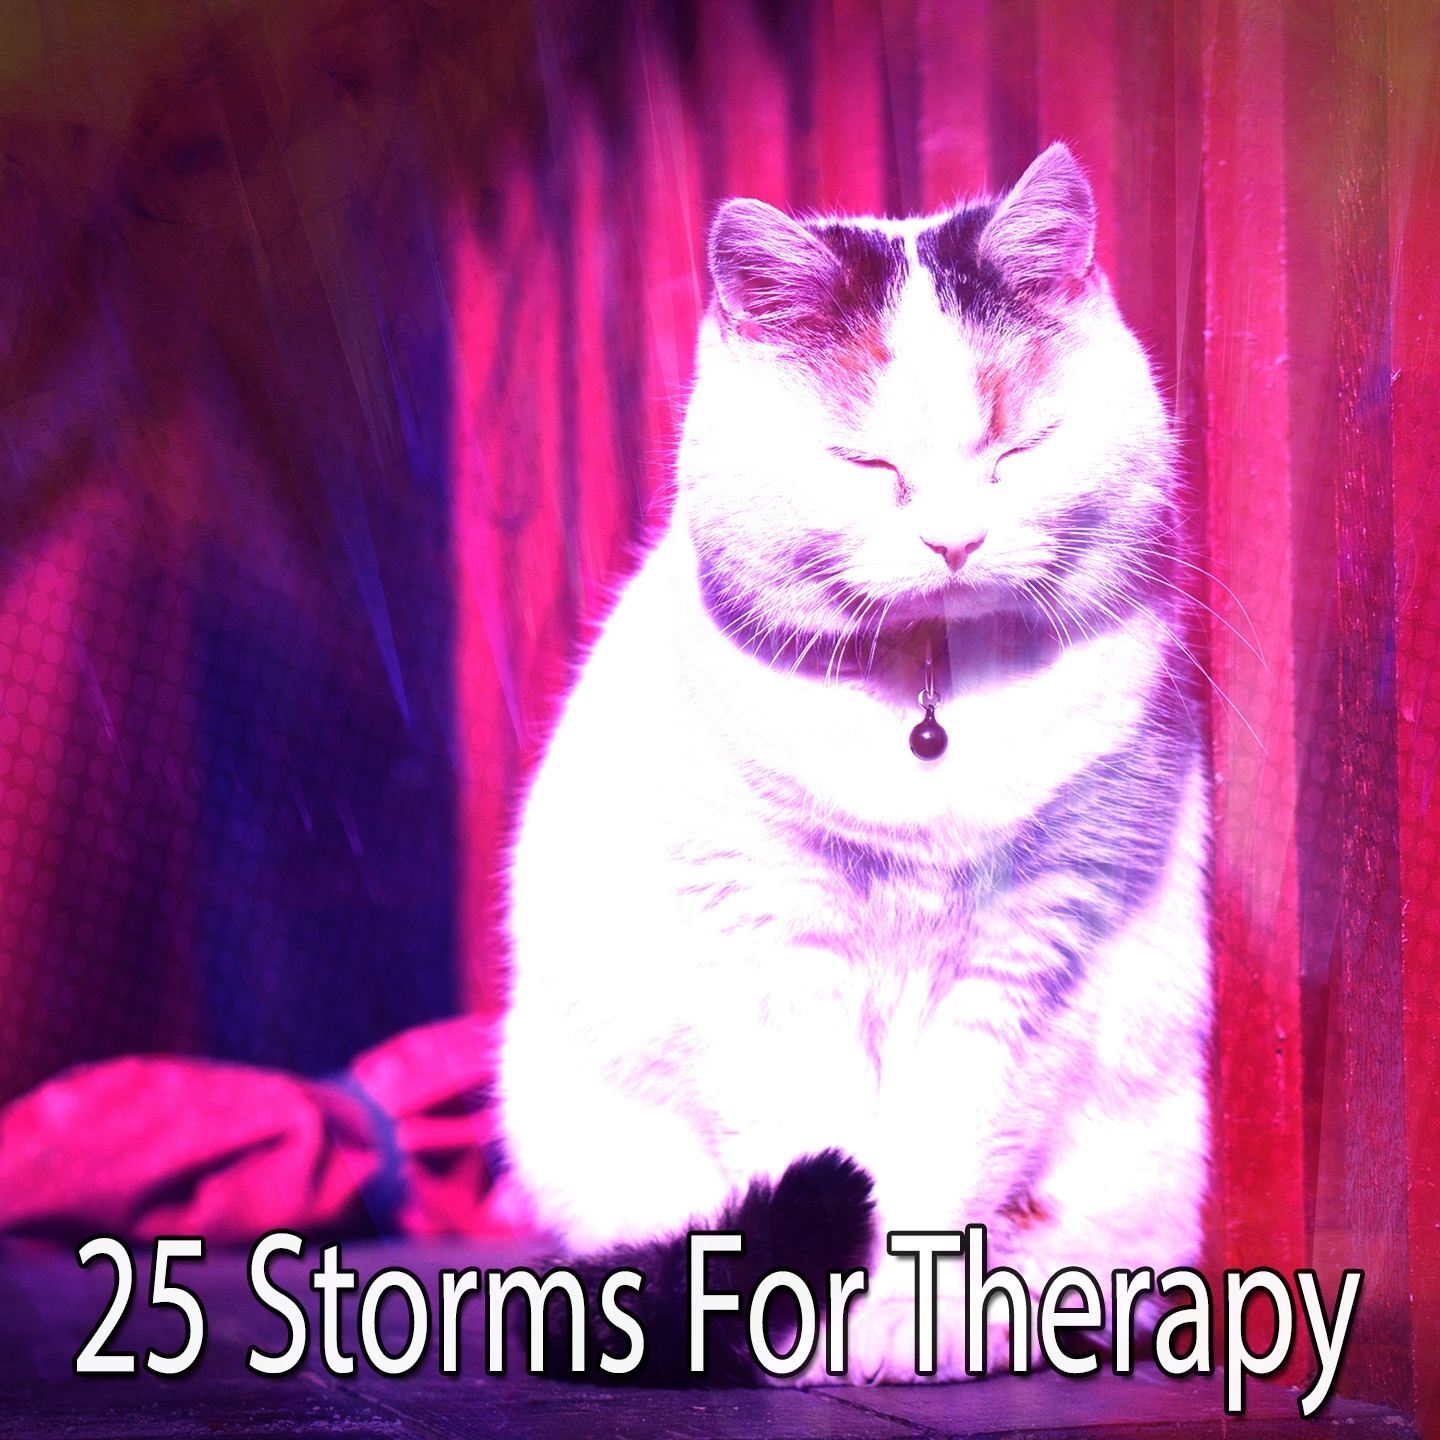 25 Storms For Therapy